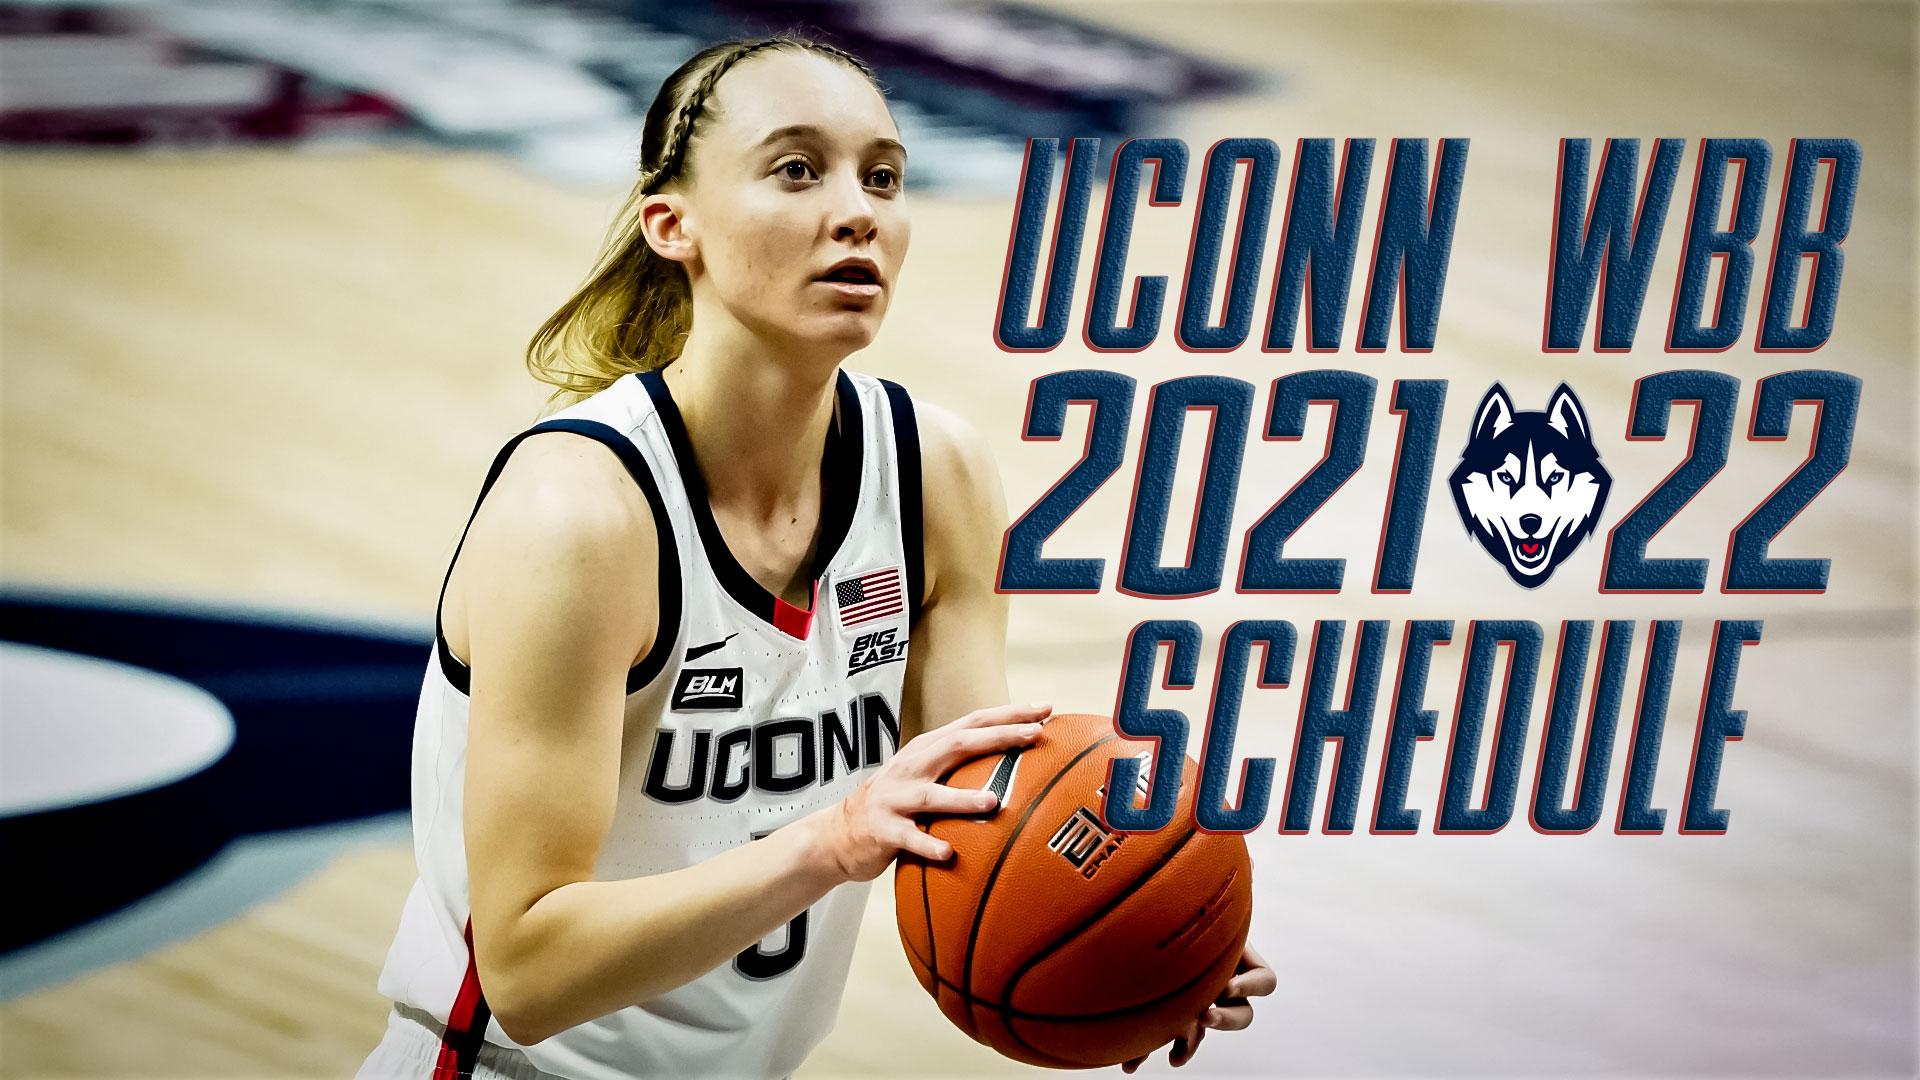 SNY Treated Art -- Dec 19, 2020; Storrs, Connecticut, USA; UConn Huskies guard Paige Bueckers shoots free-throw vs Xavier Musketeers at Harry A. Gampel Pavilion. / David Butler II-USA TODAY Sports